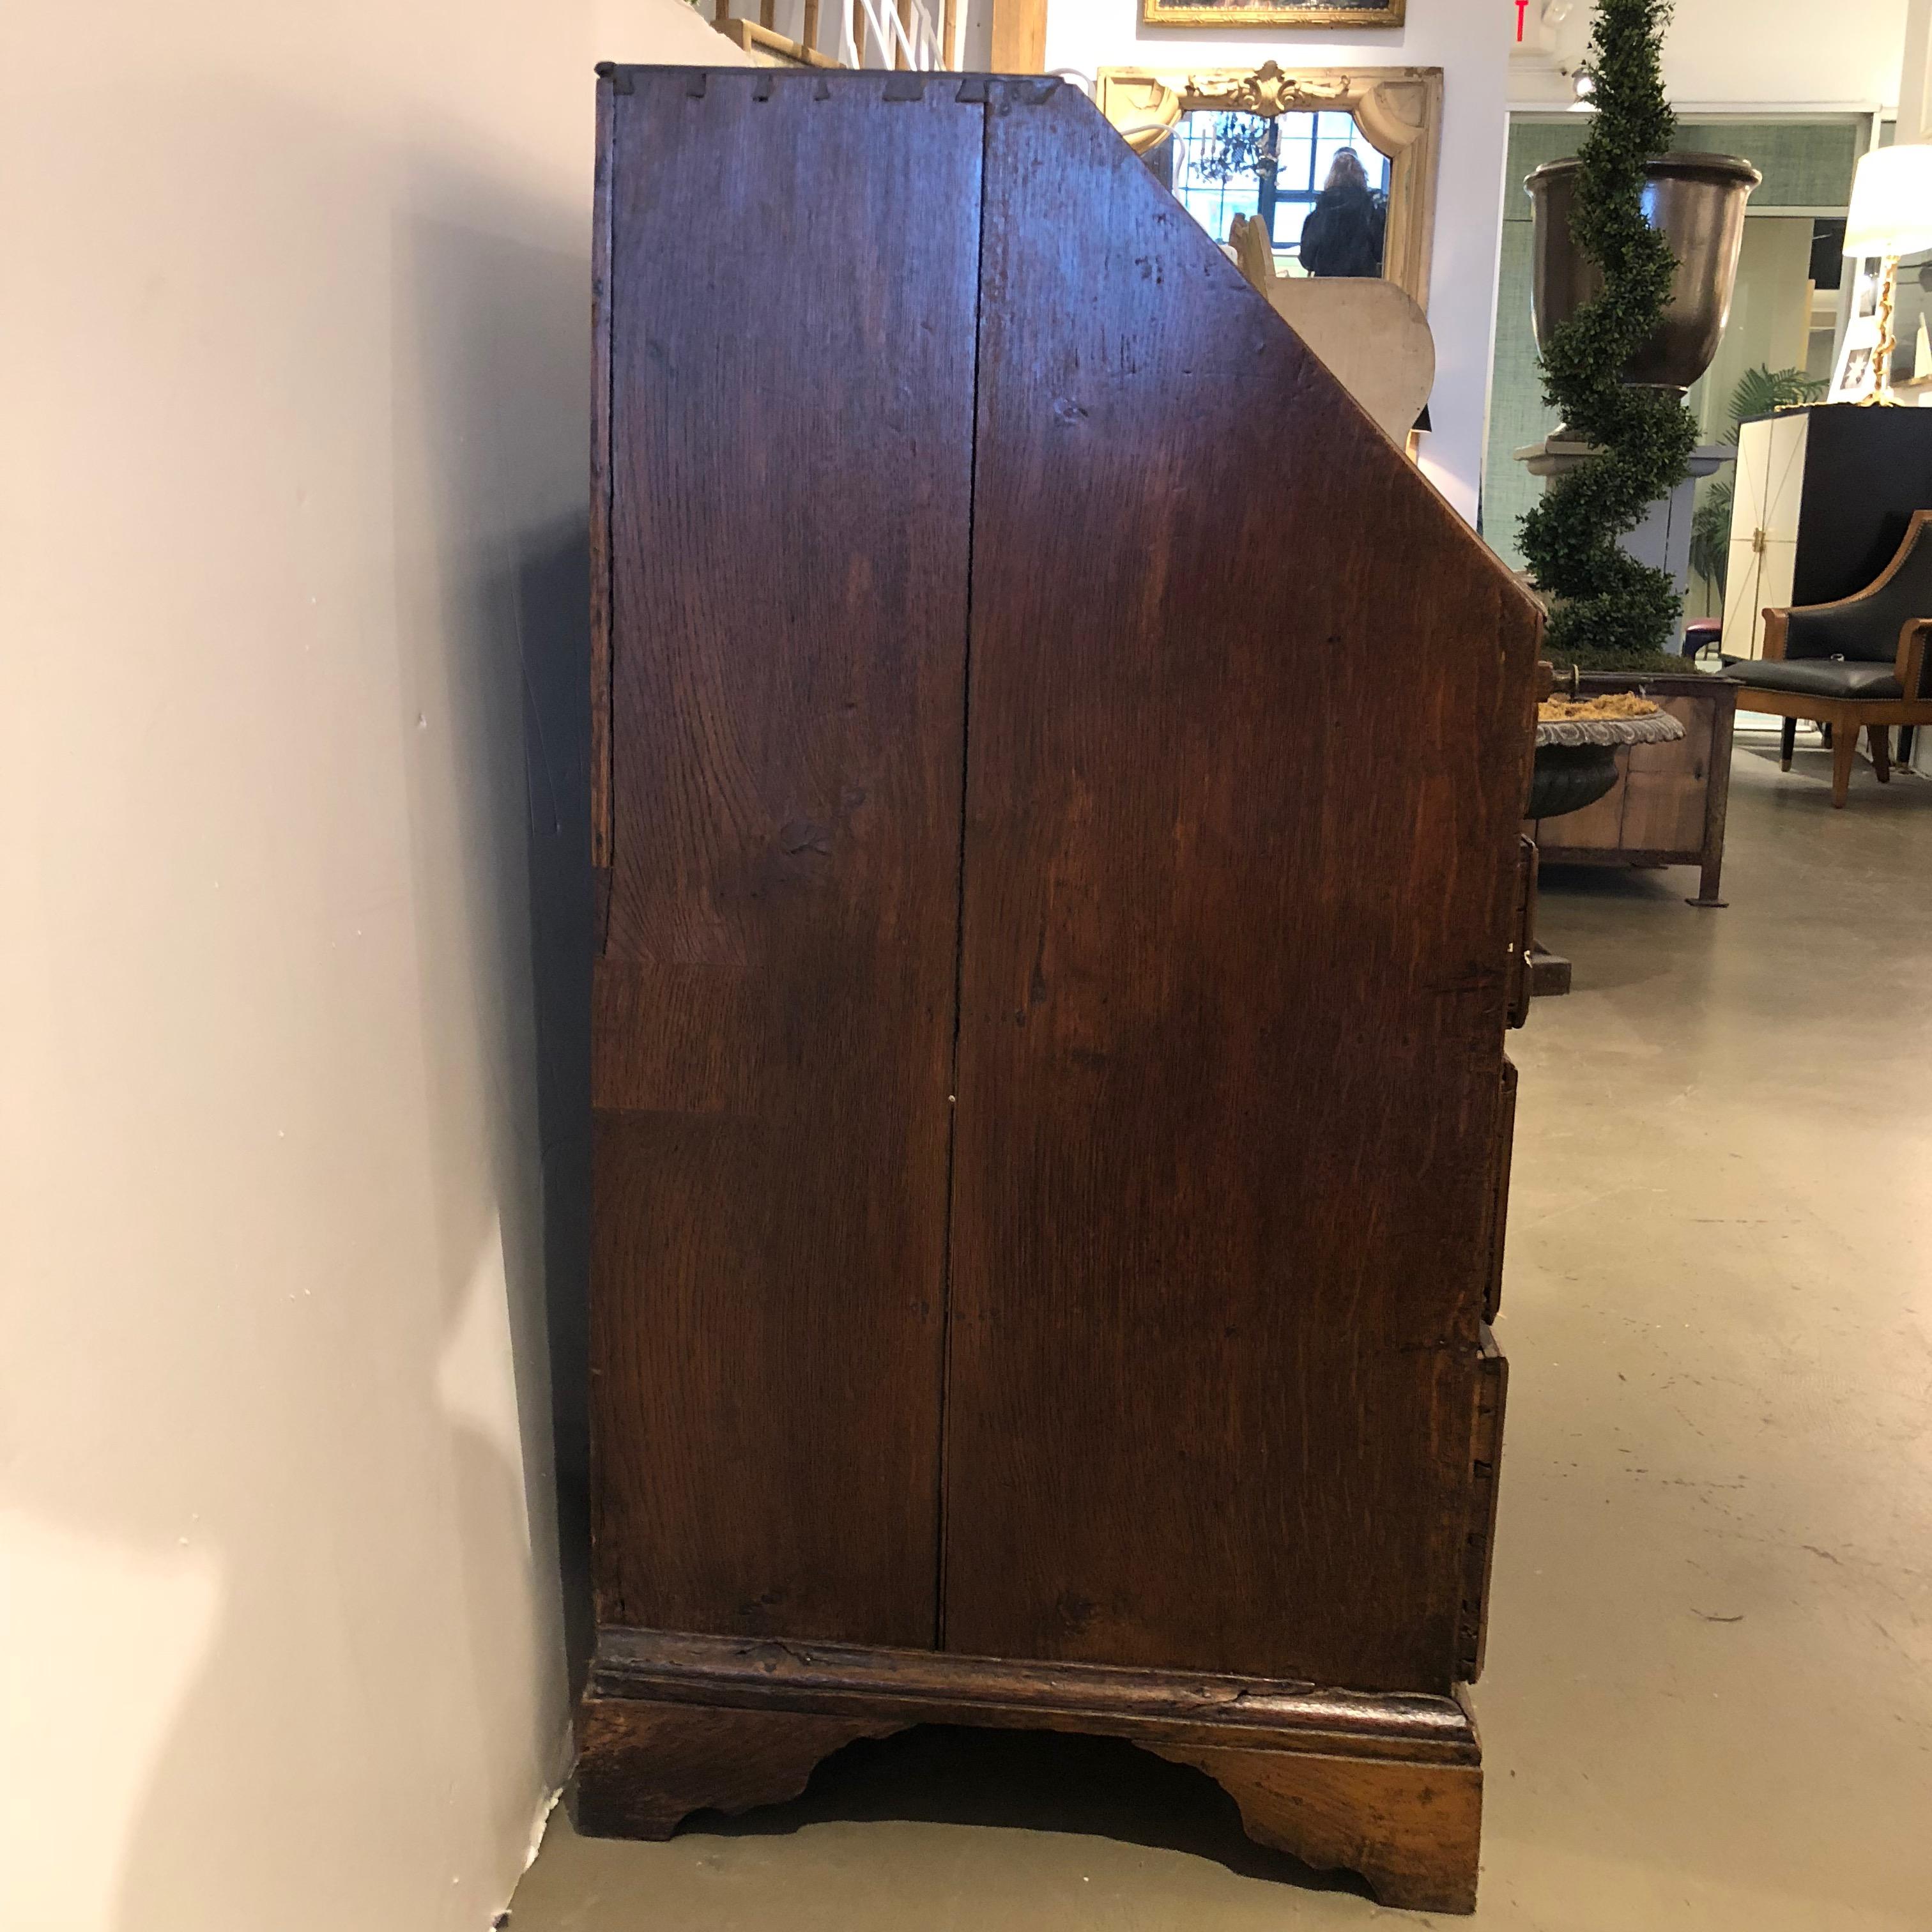 Late 18 century English oak slant front desk with banded inlay in good order. Two - side by side upper small drawers and two - full width lower drawers. Original wood pulls replaced with appropriate antique brasses. Many hidden interior compartments